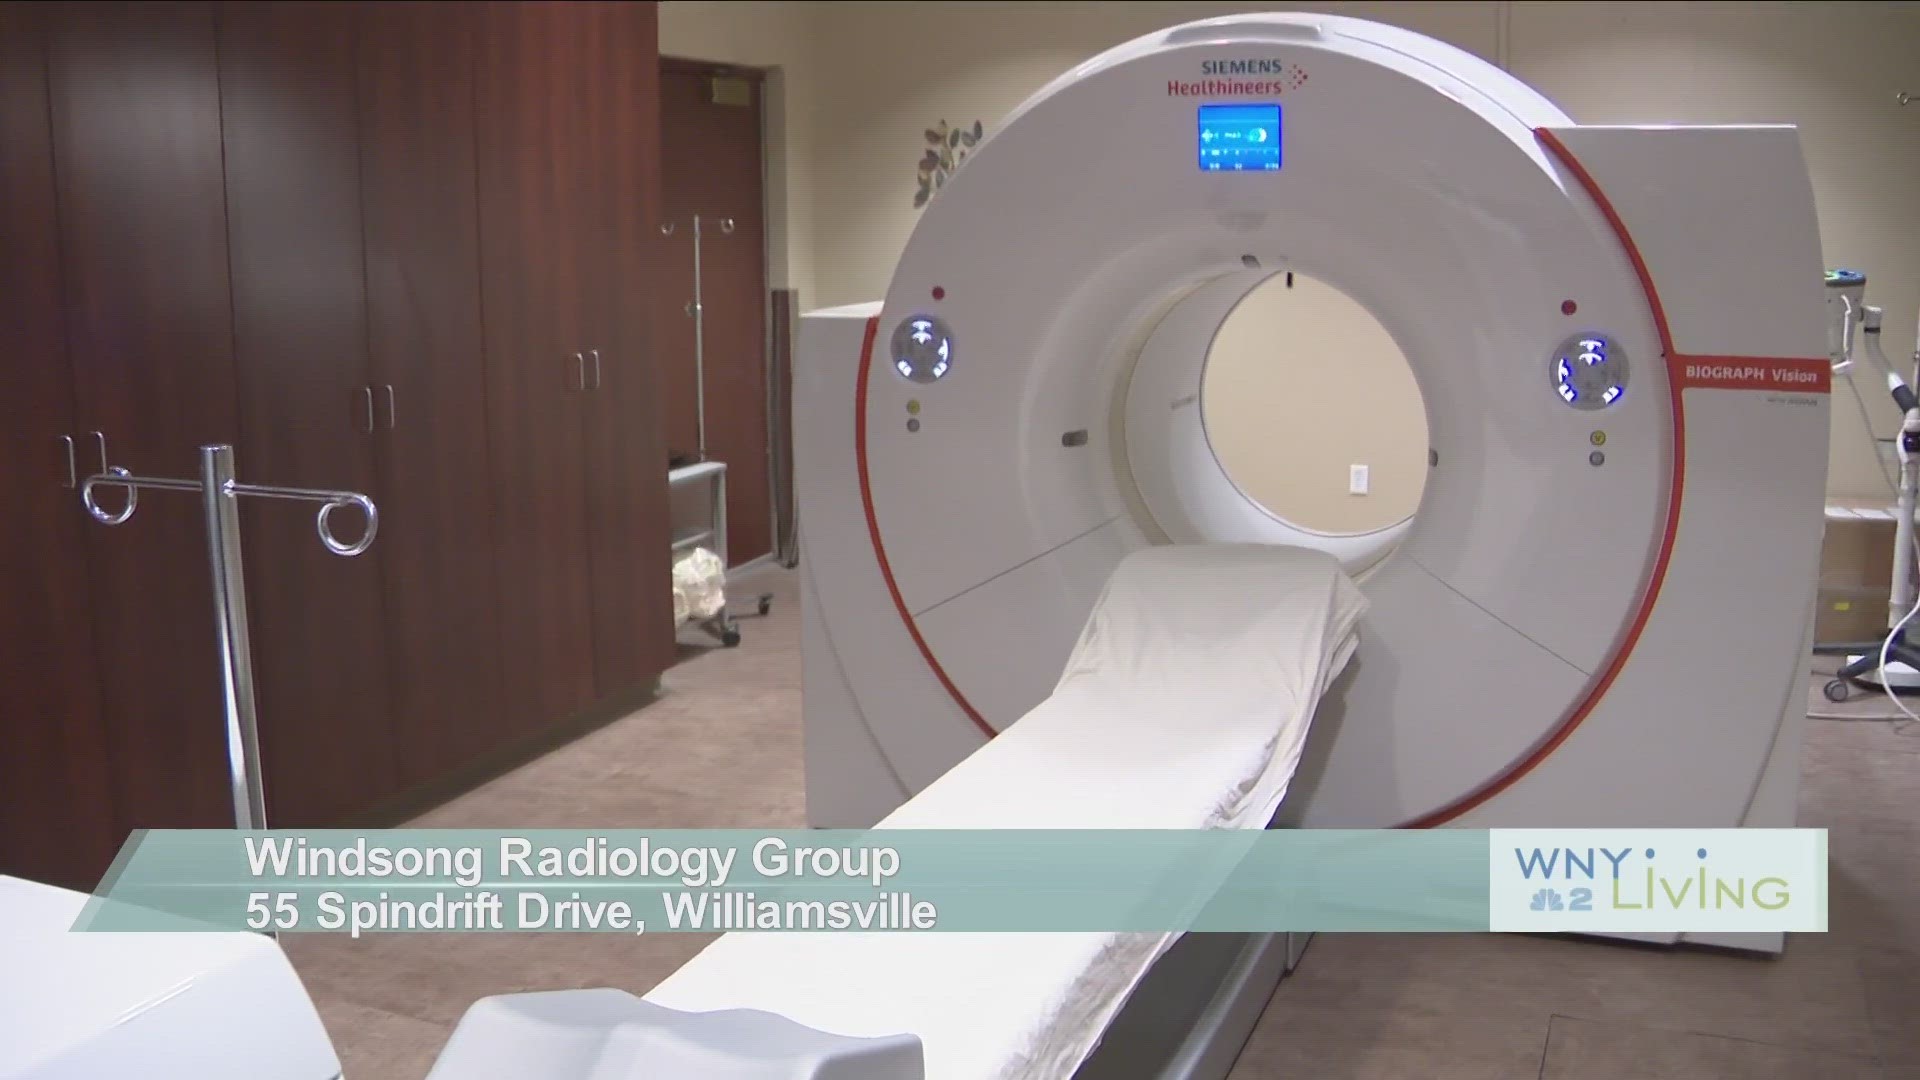 May 6th-WNY Living- Windsong Radiology Group (THIS VIDEO IS SPONSORED BY WINDSONG RADIOLOGY)